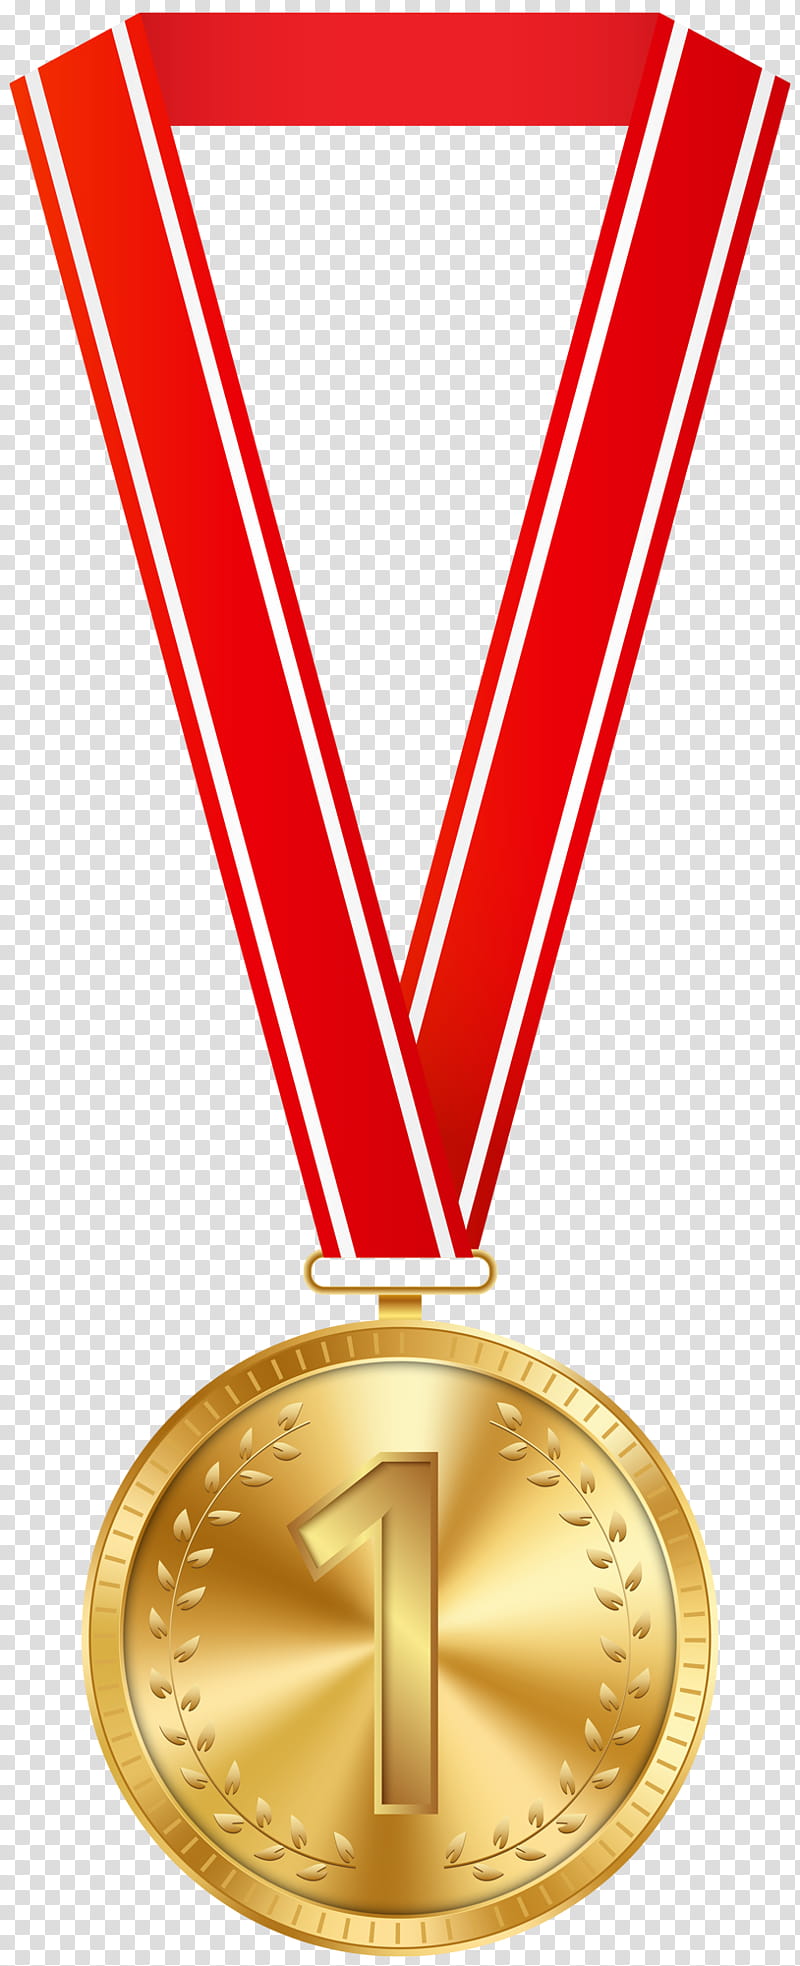 Cartoon Gold Medal, Olympic Games, Olympic Medal, Silver Medal, Bronze Medal, Medal Table, Award transparent background PNG clipart